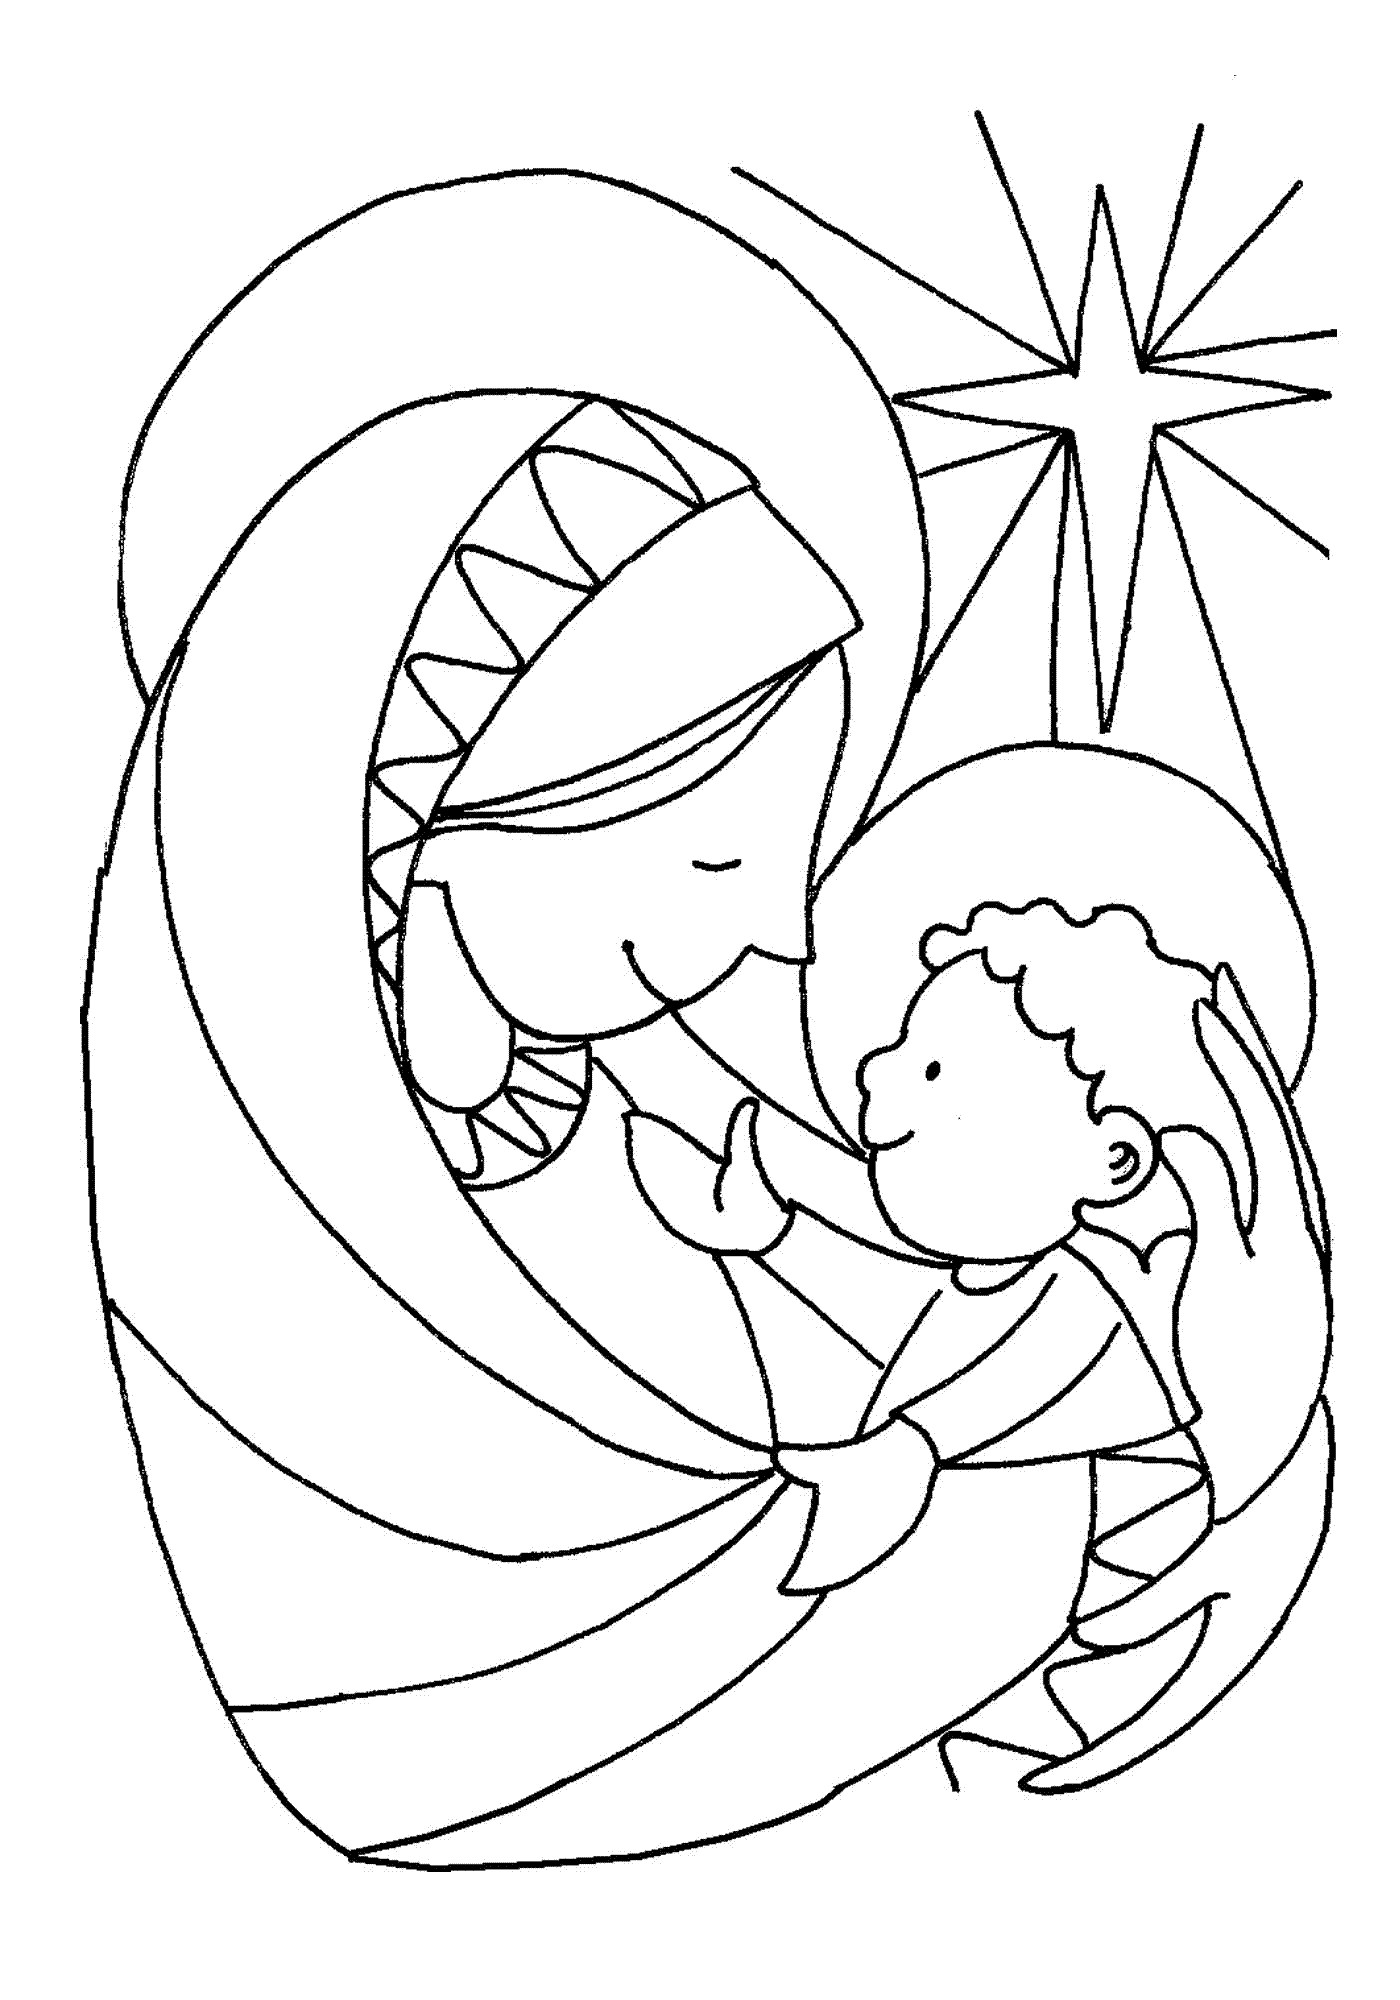 Baby Jesus Coloring Pages For Preschoolers
 301 Moved Permanently